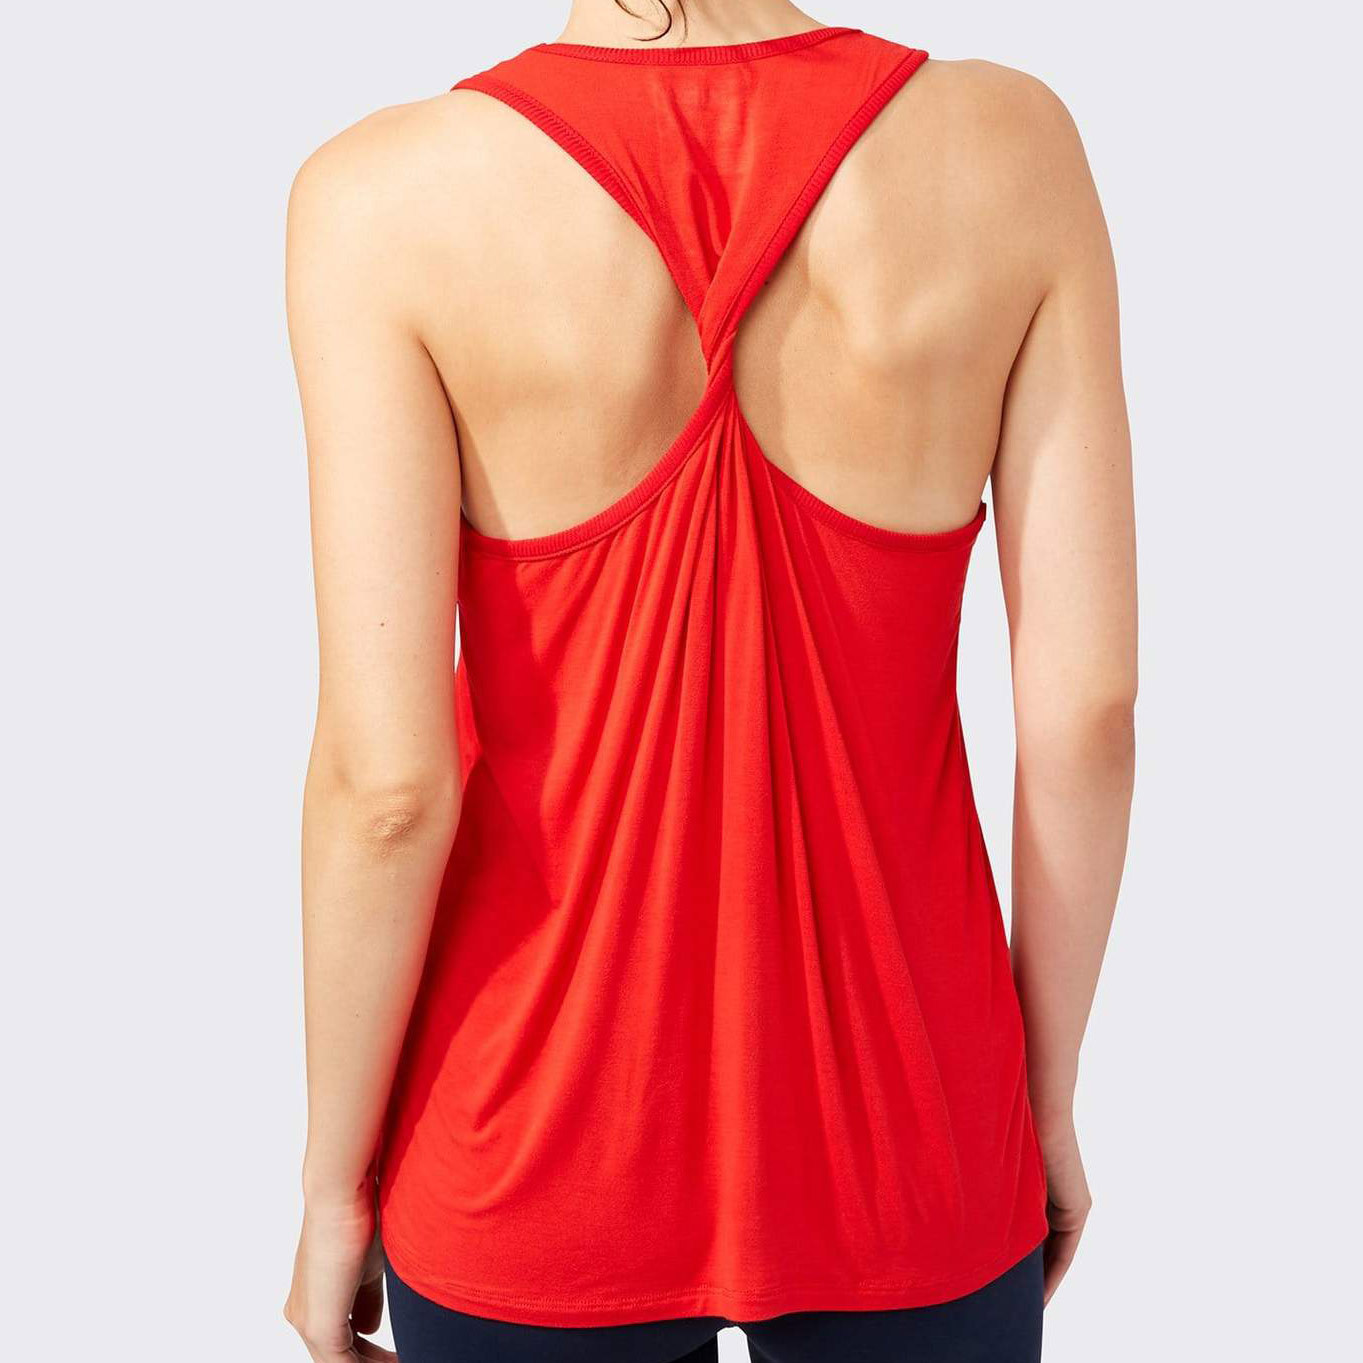 athletic works tank tops